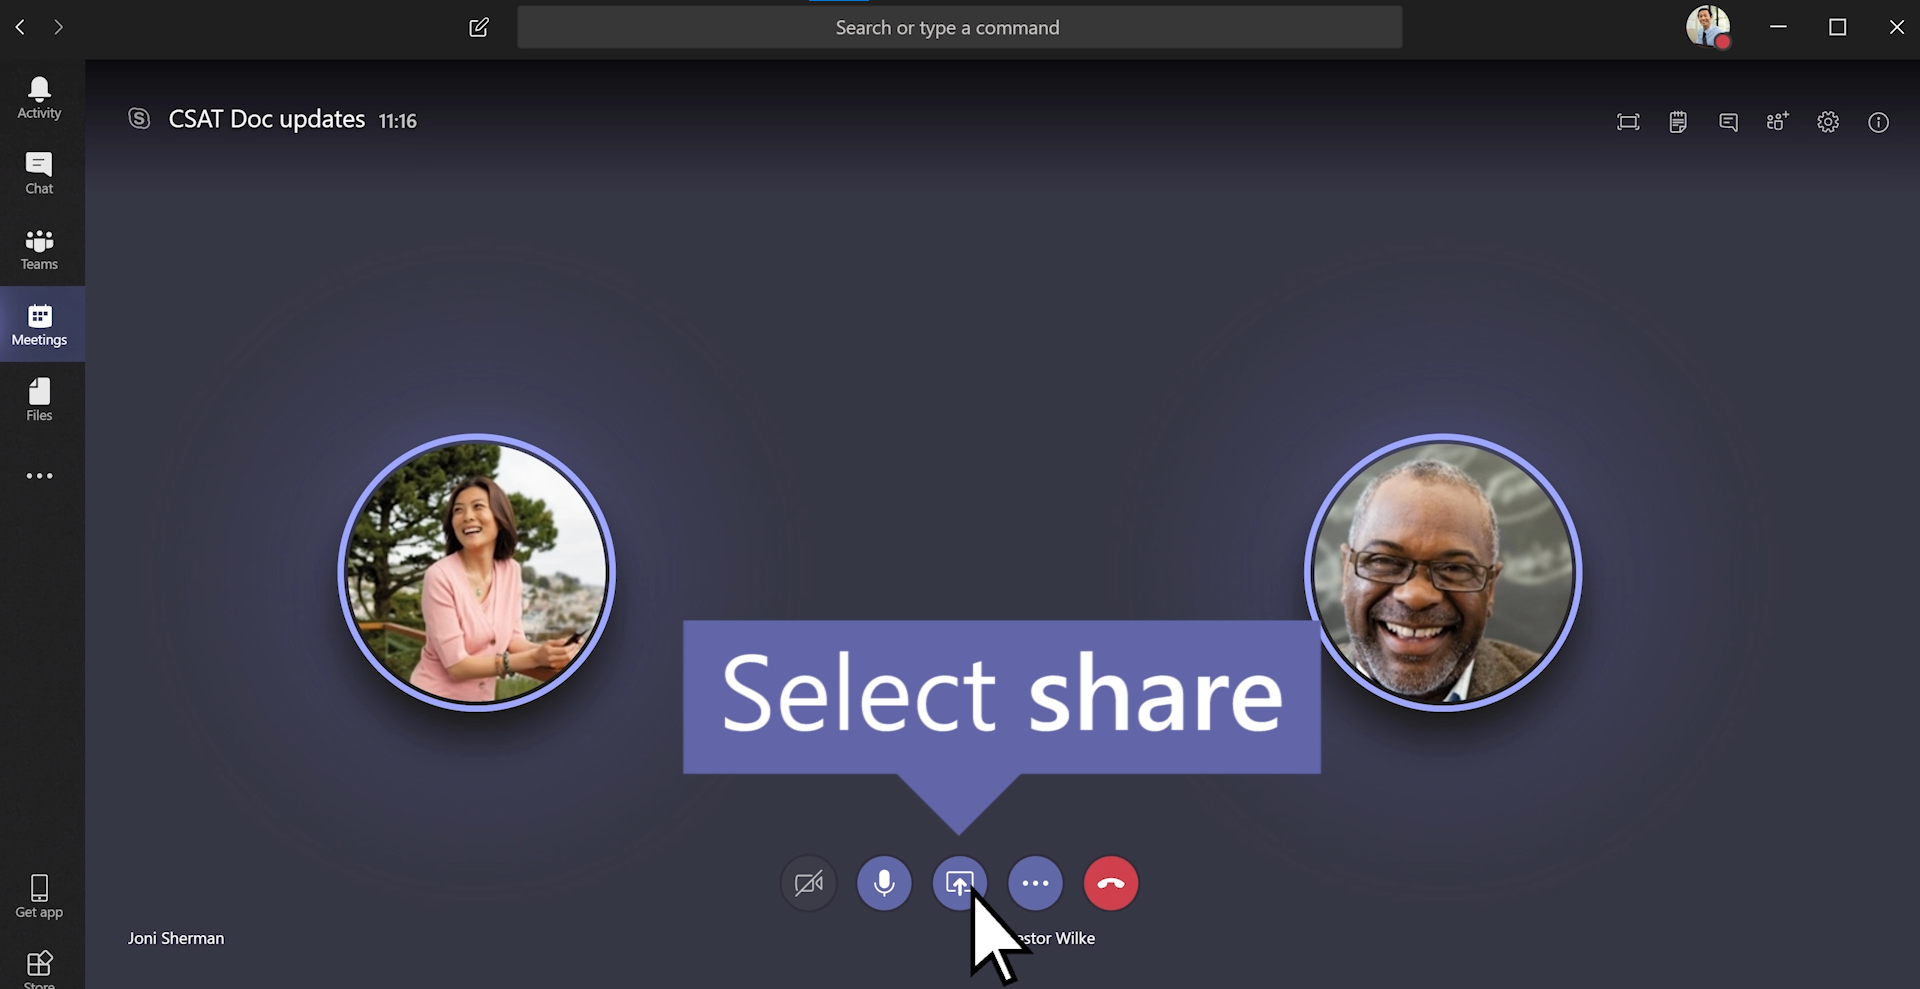 How to share your screen in Microsoft Teams